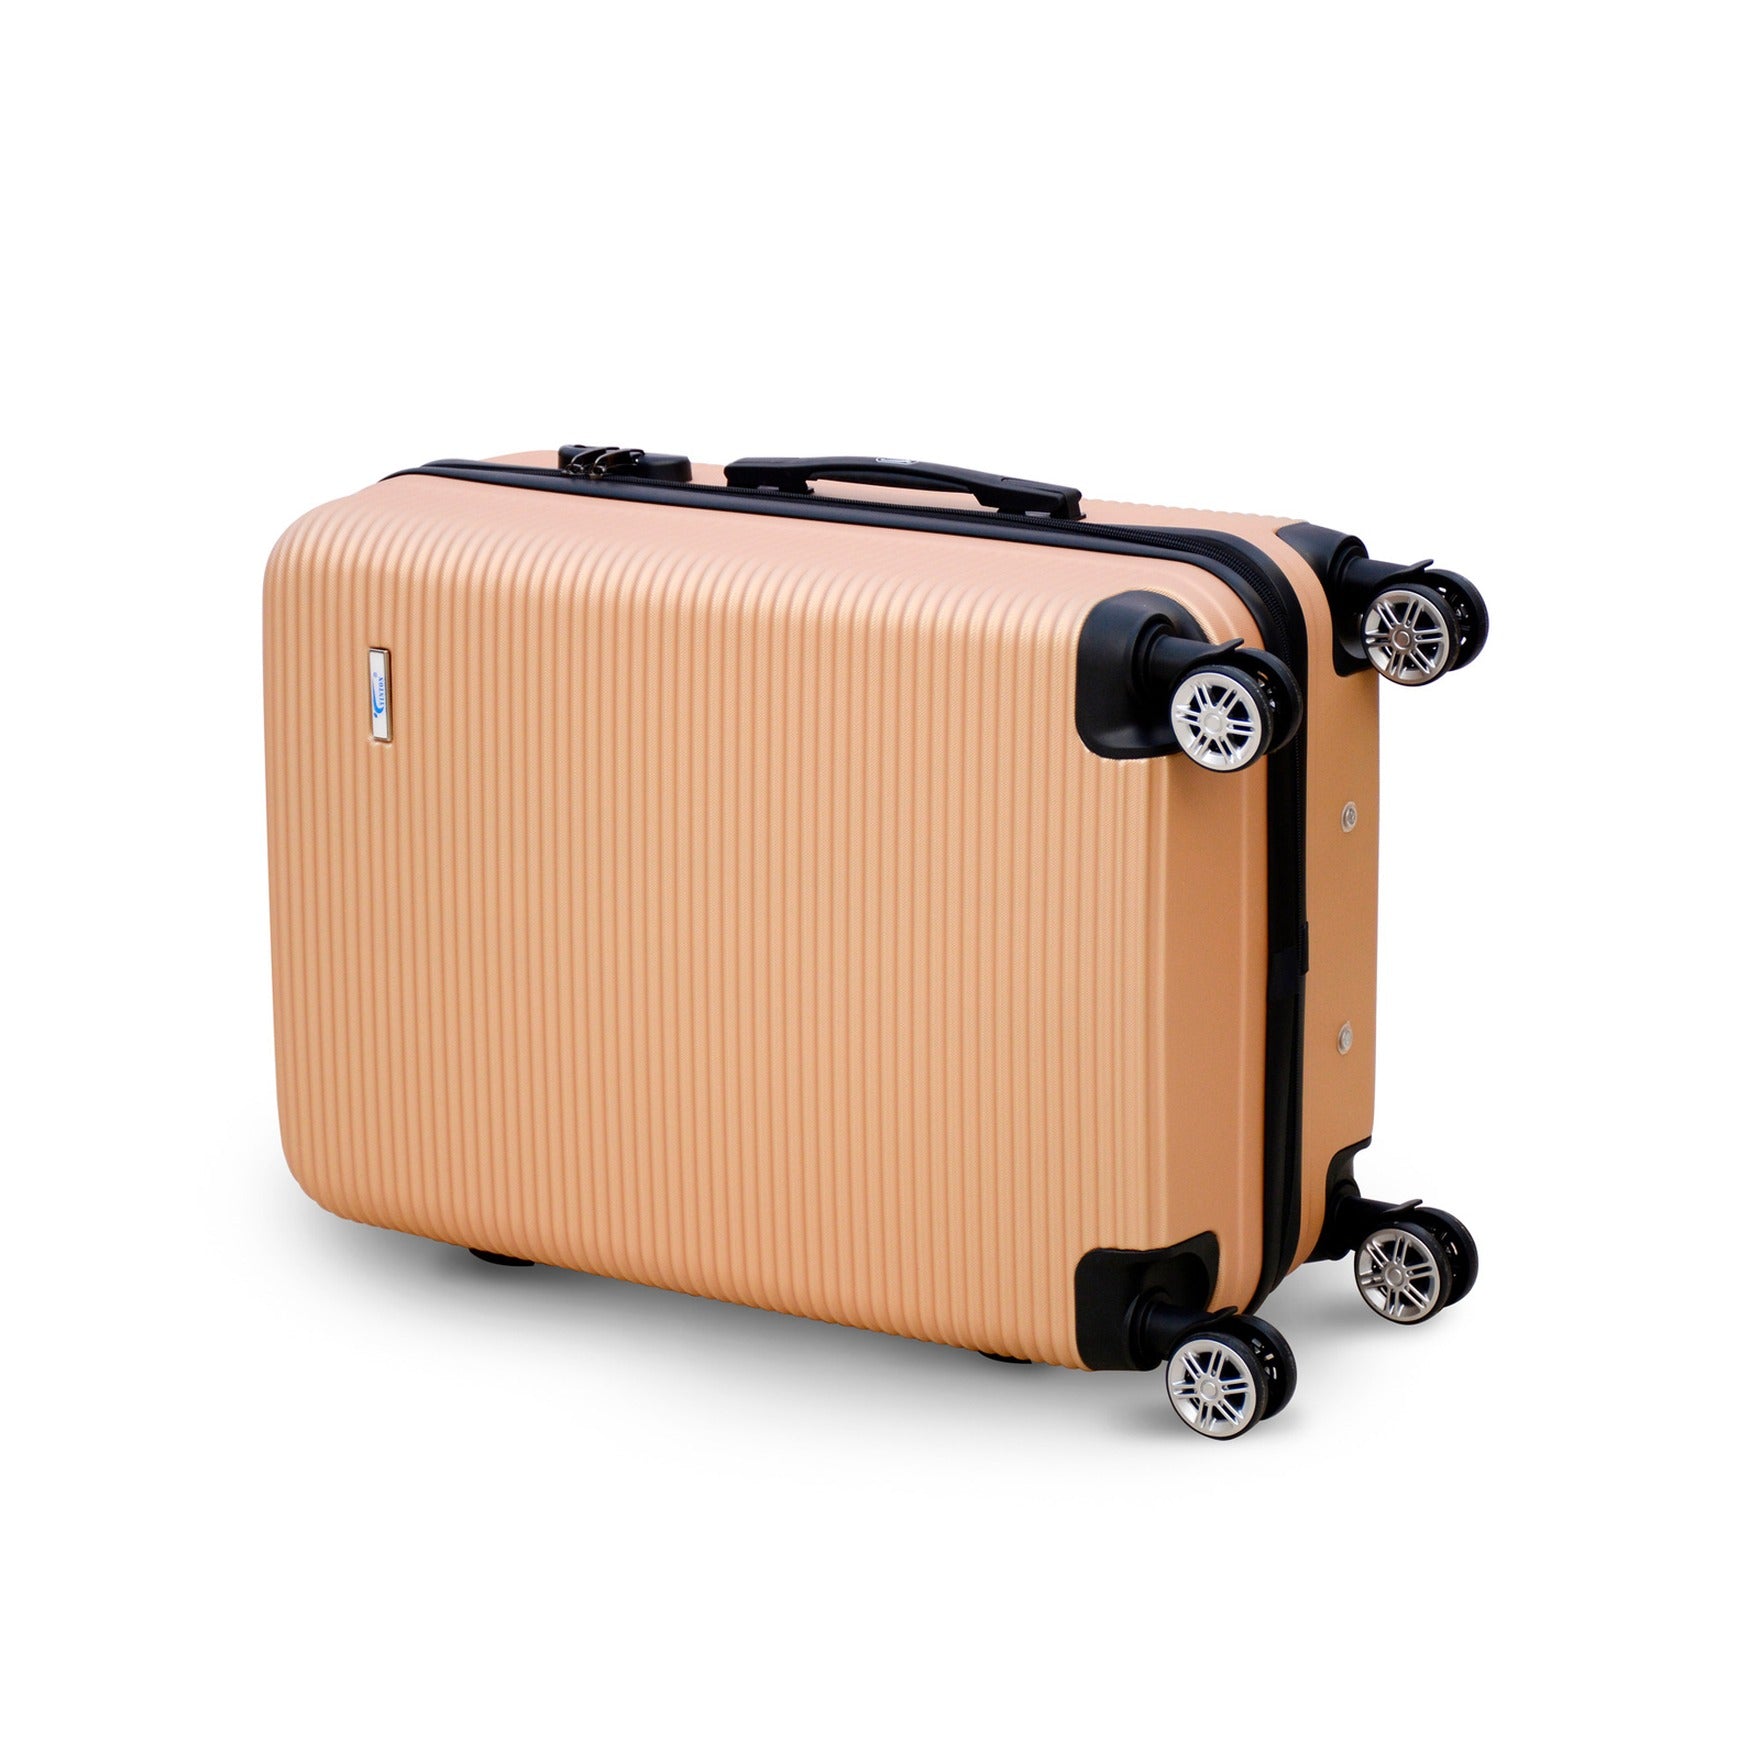 20" Gold Colour JIAN ABS Line Luggage Lightweight Hard Case Carry On Trolley Bag With Spinner Wheel